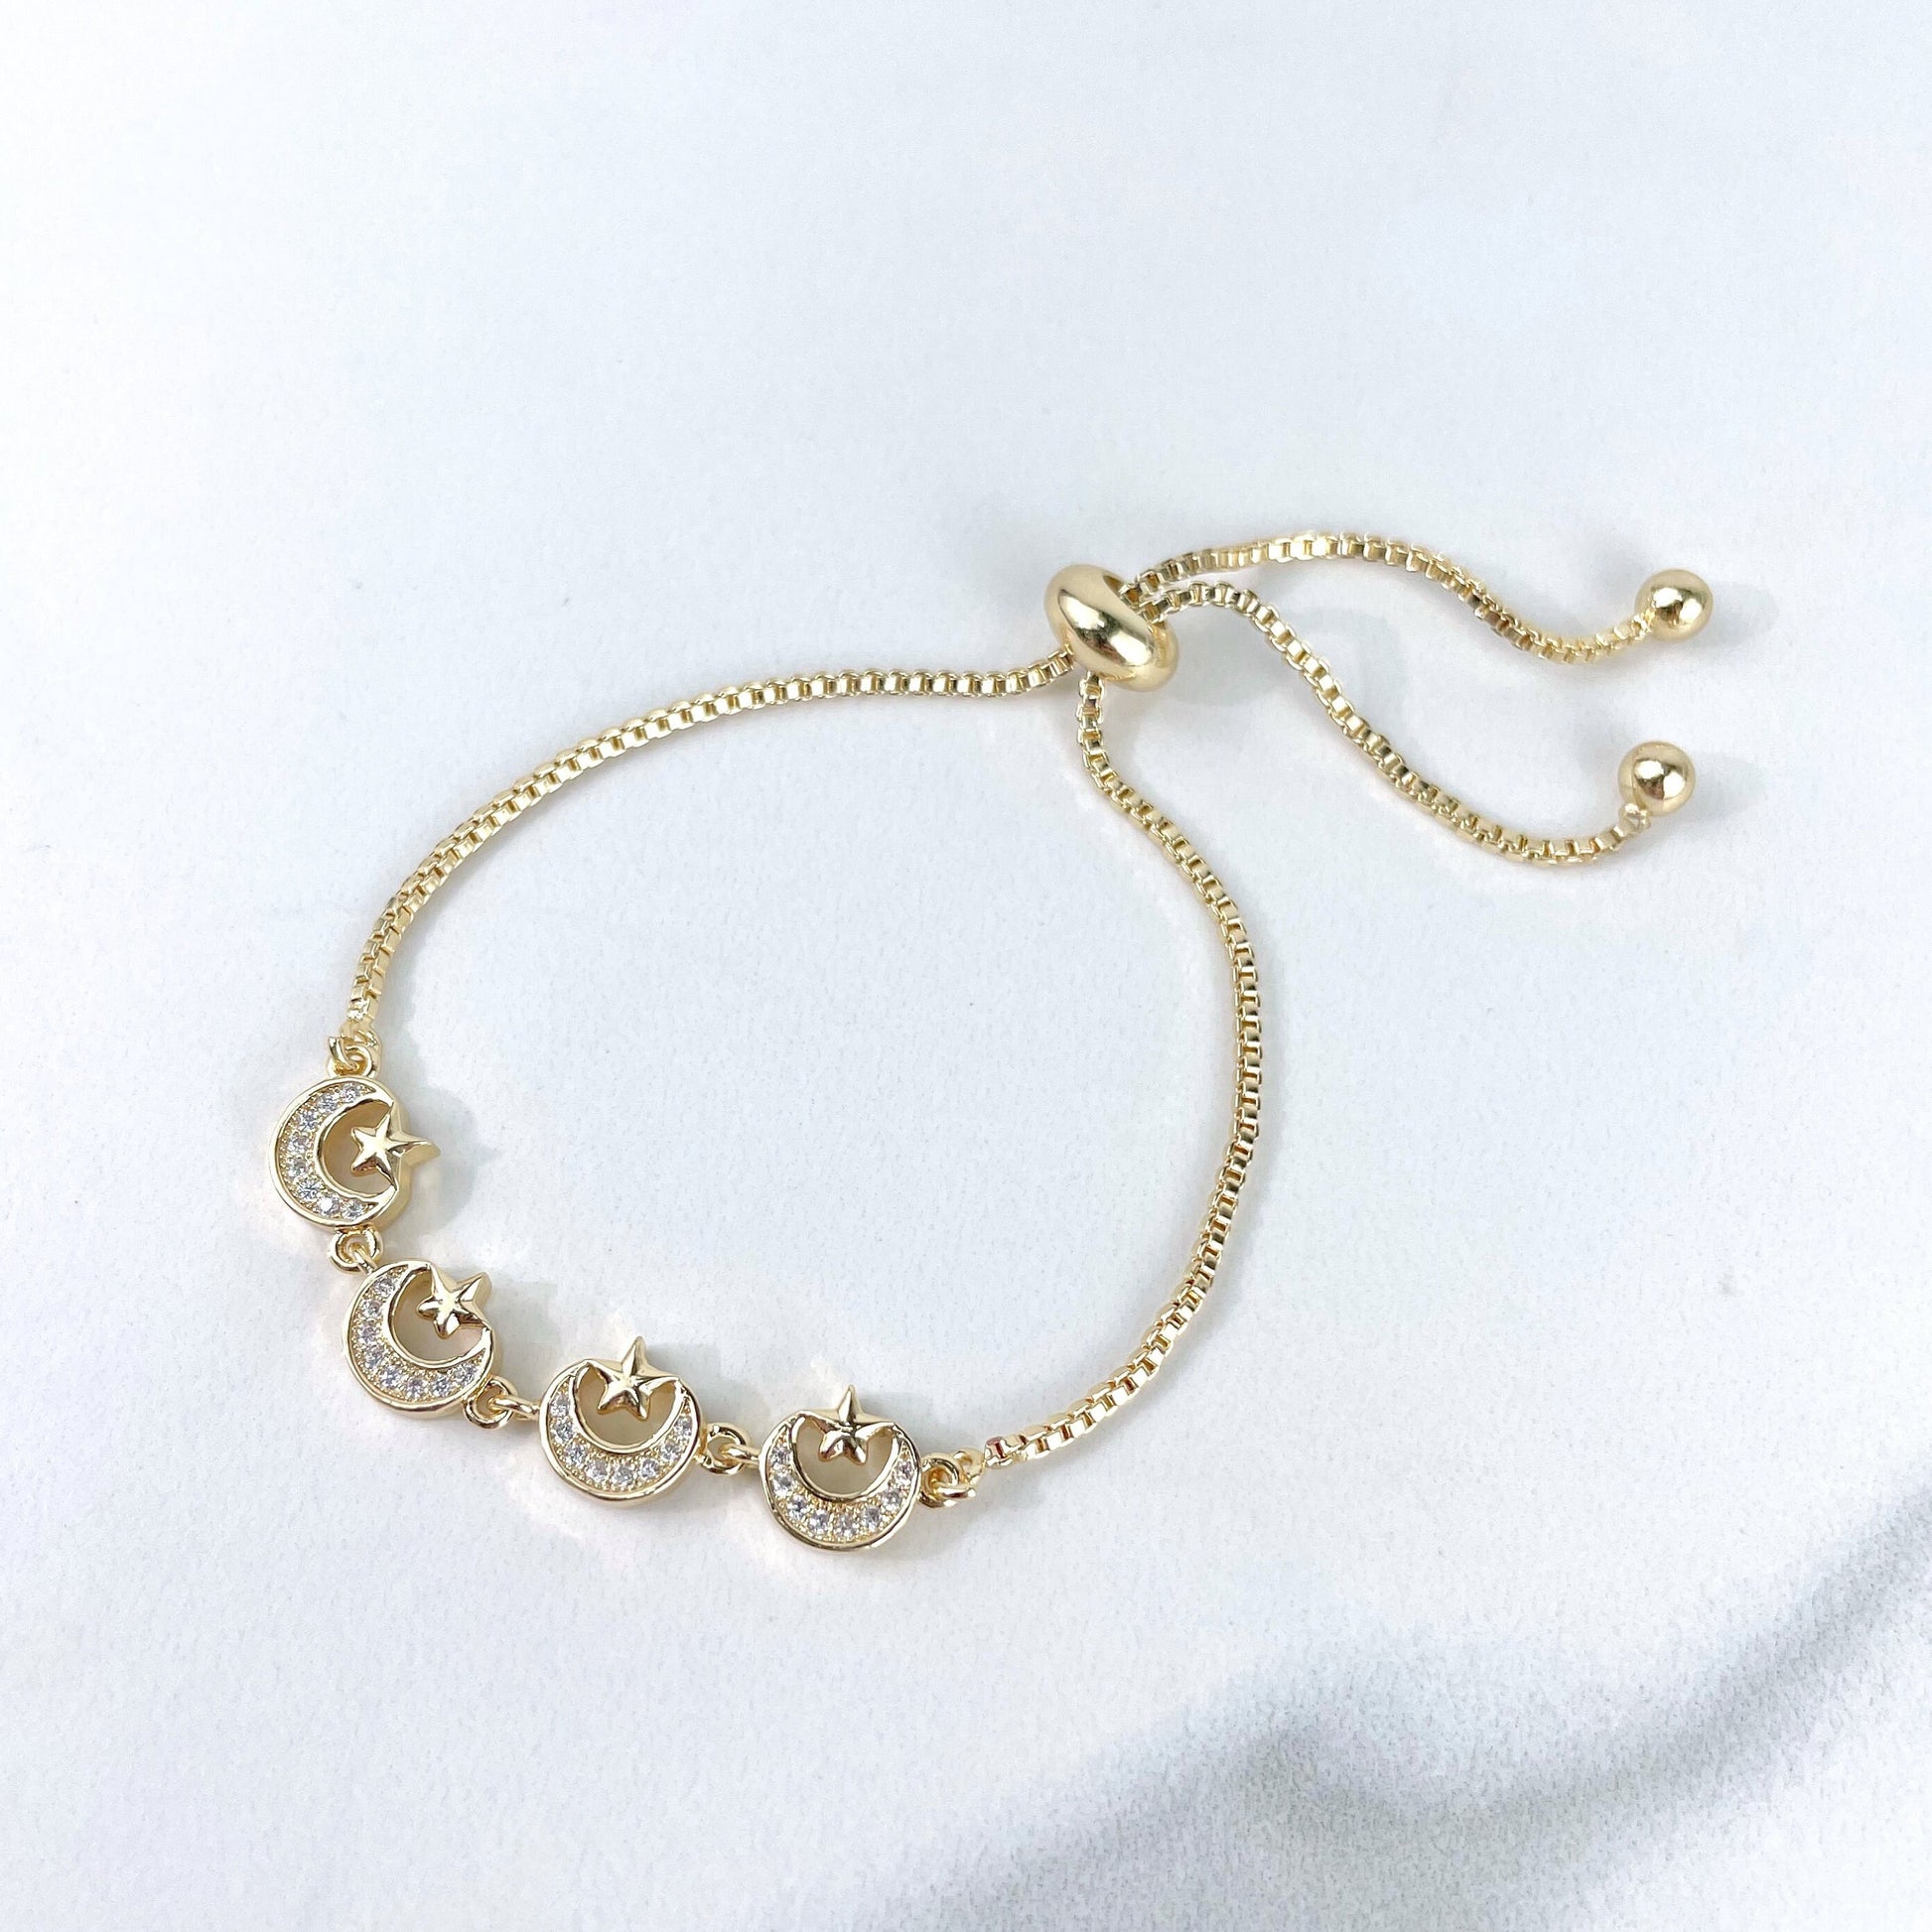 18k Gold Filled 1mm Box Chain, Micro Pave, Cubic Zirconia, Moon and Bright Star Charms, Adjustable Bracelet, Wholesale Jewelry Supplies